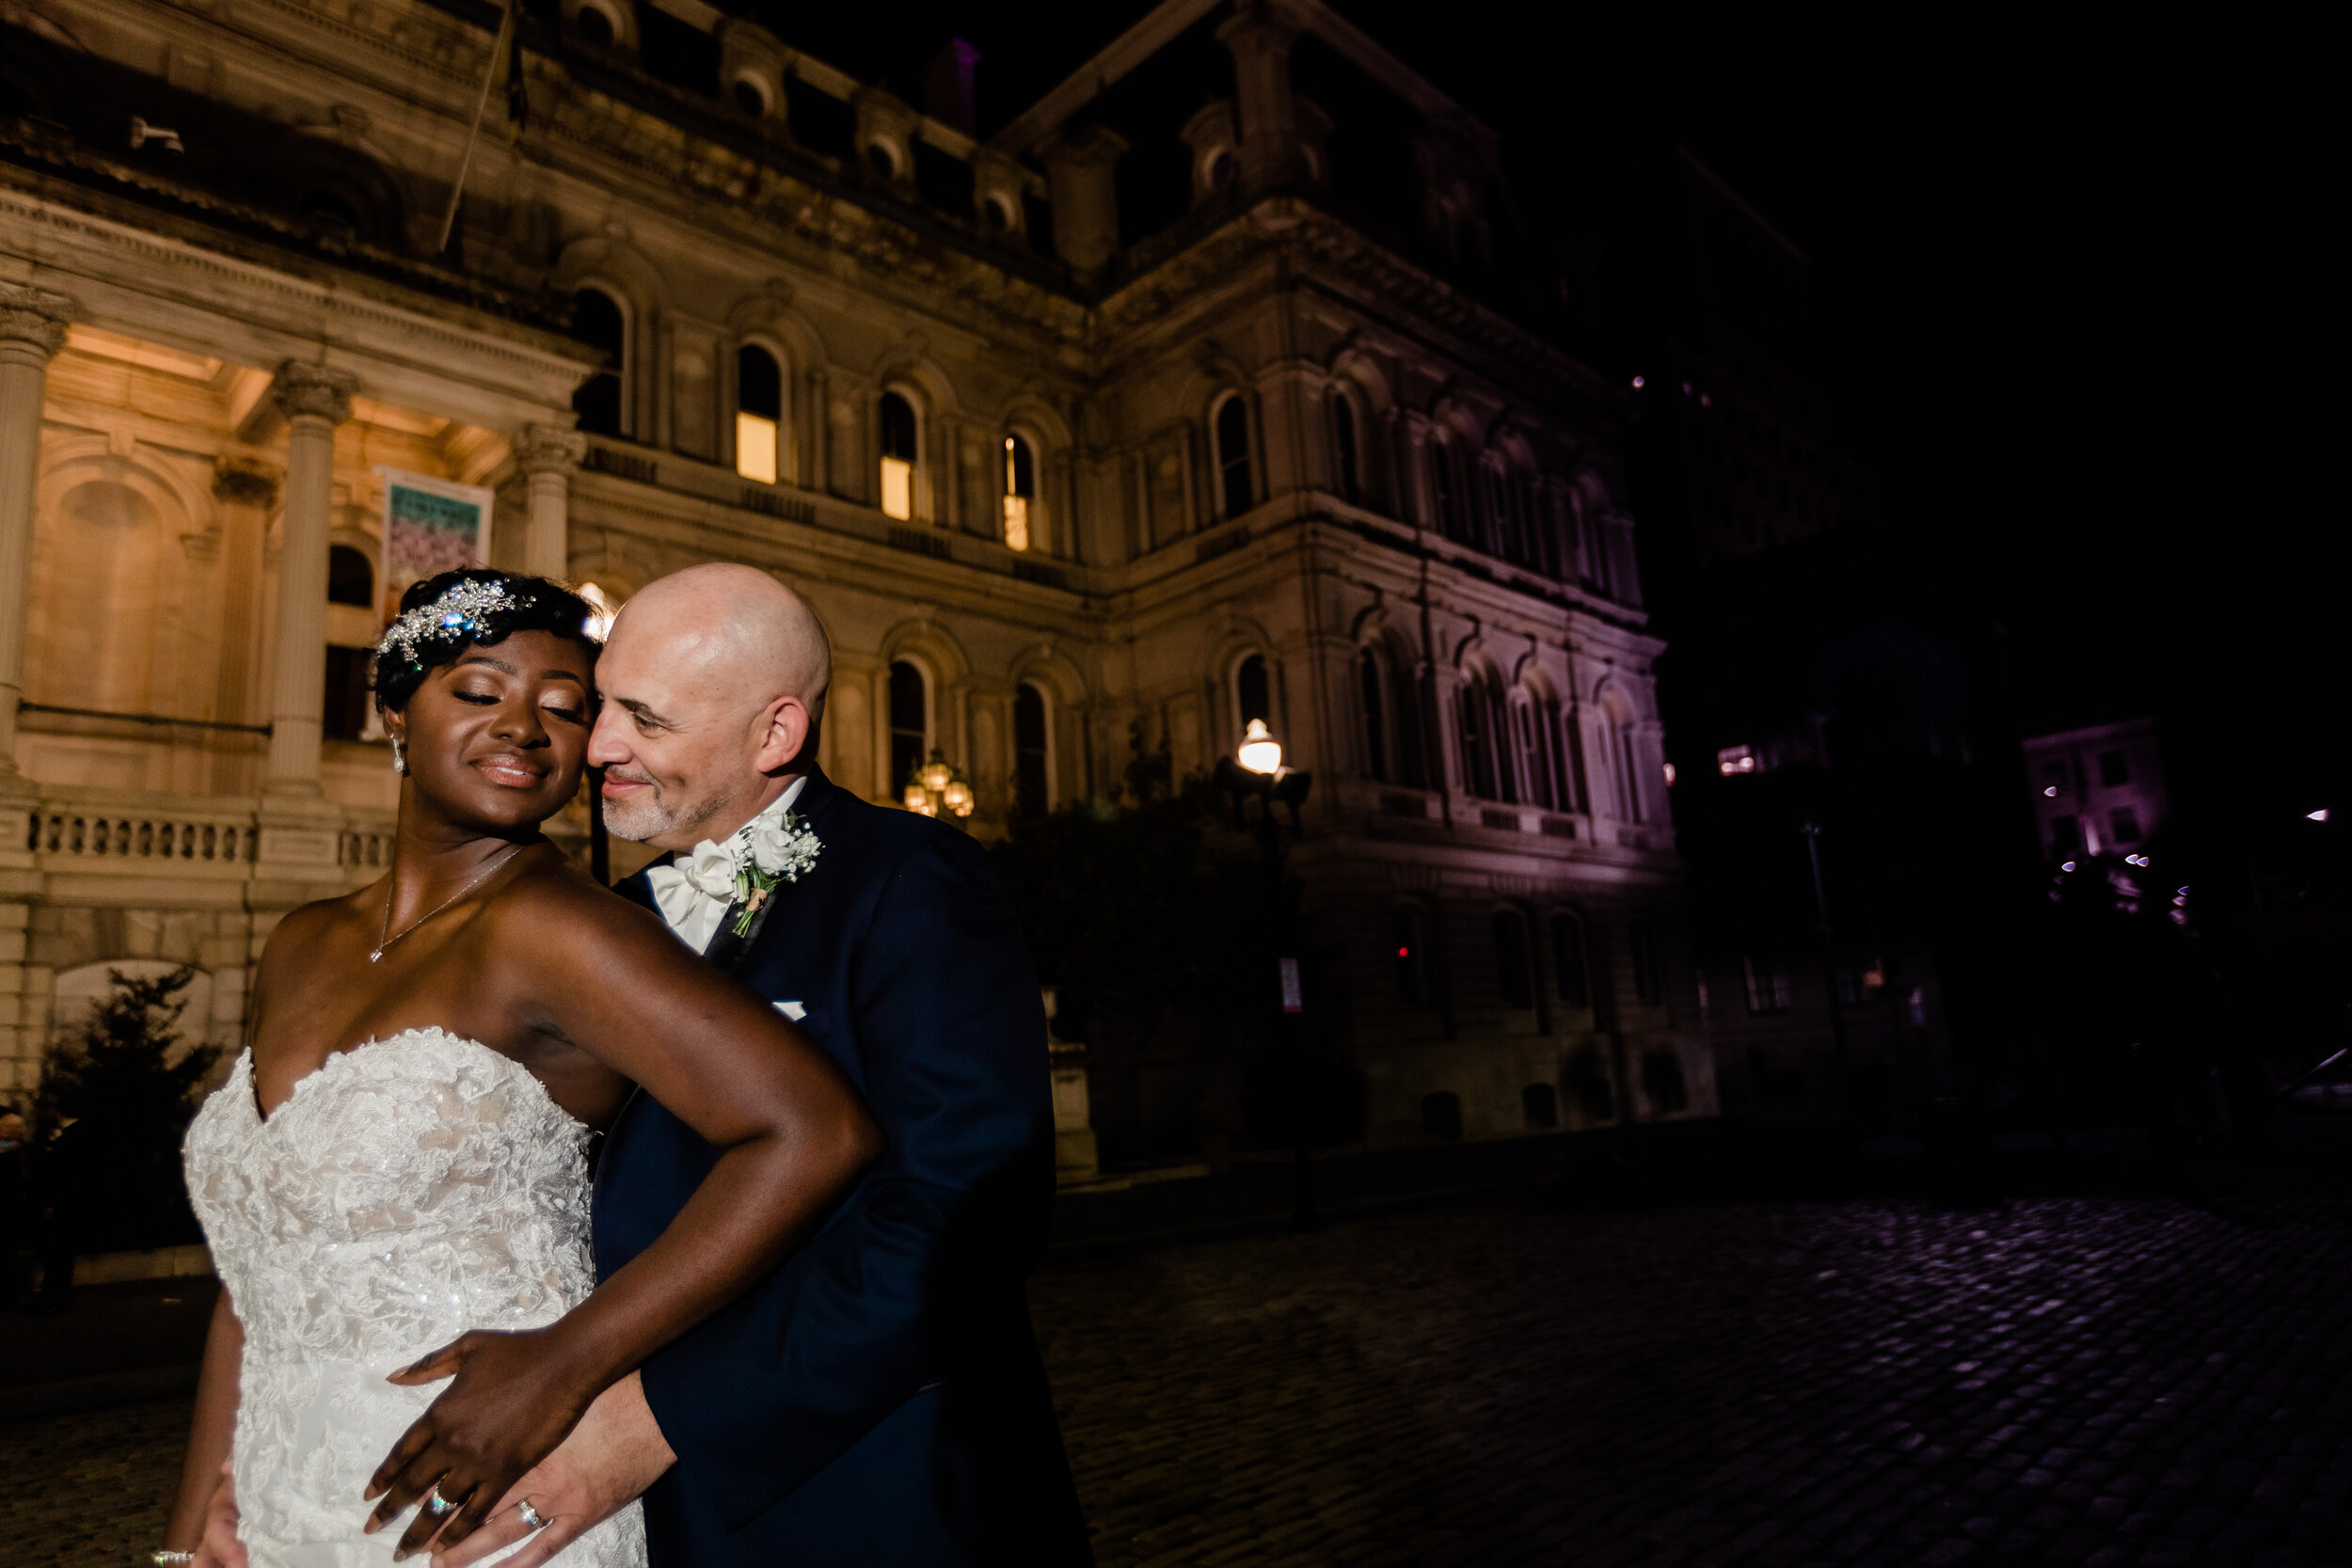 get married in baltimore city hall shot by megapixels media biracial couple wedding photographers maryland-97.jpg